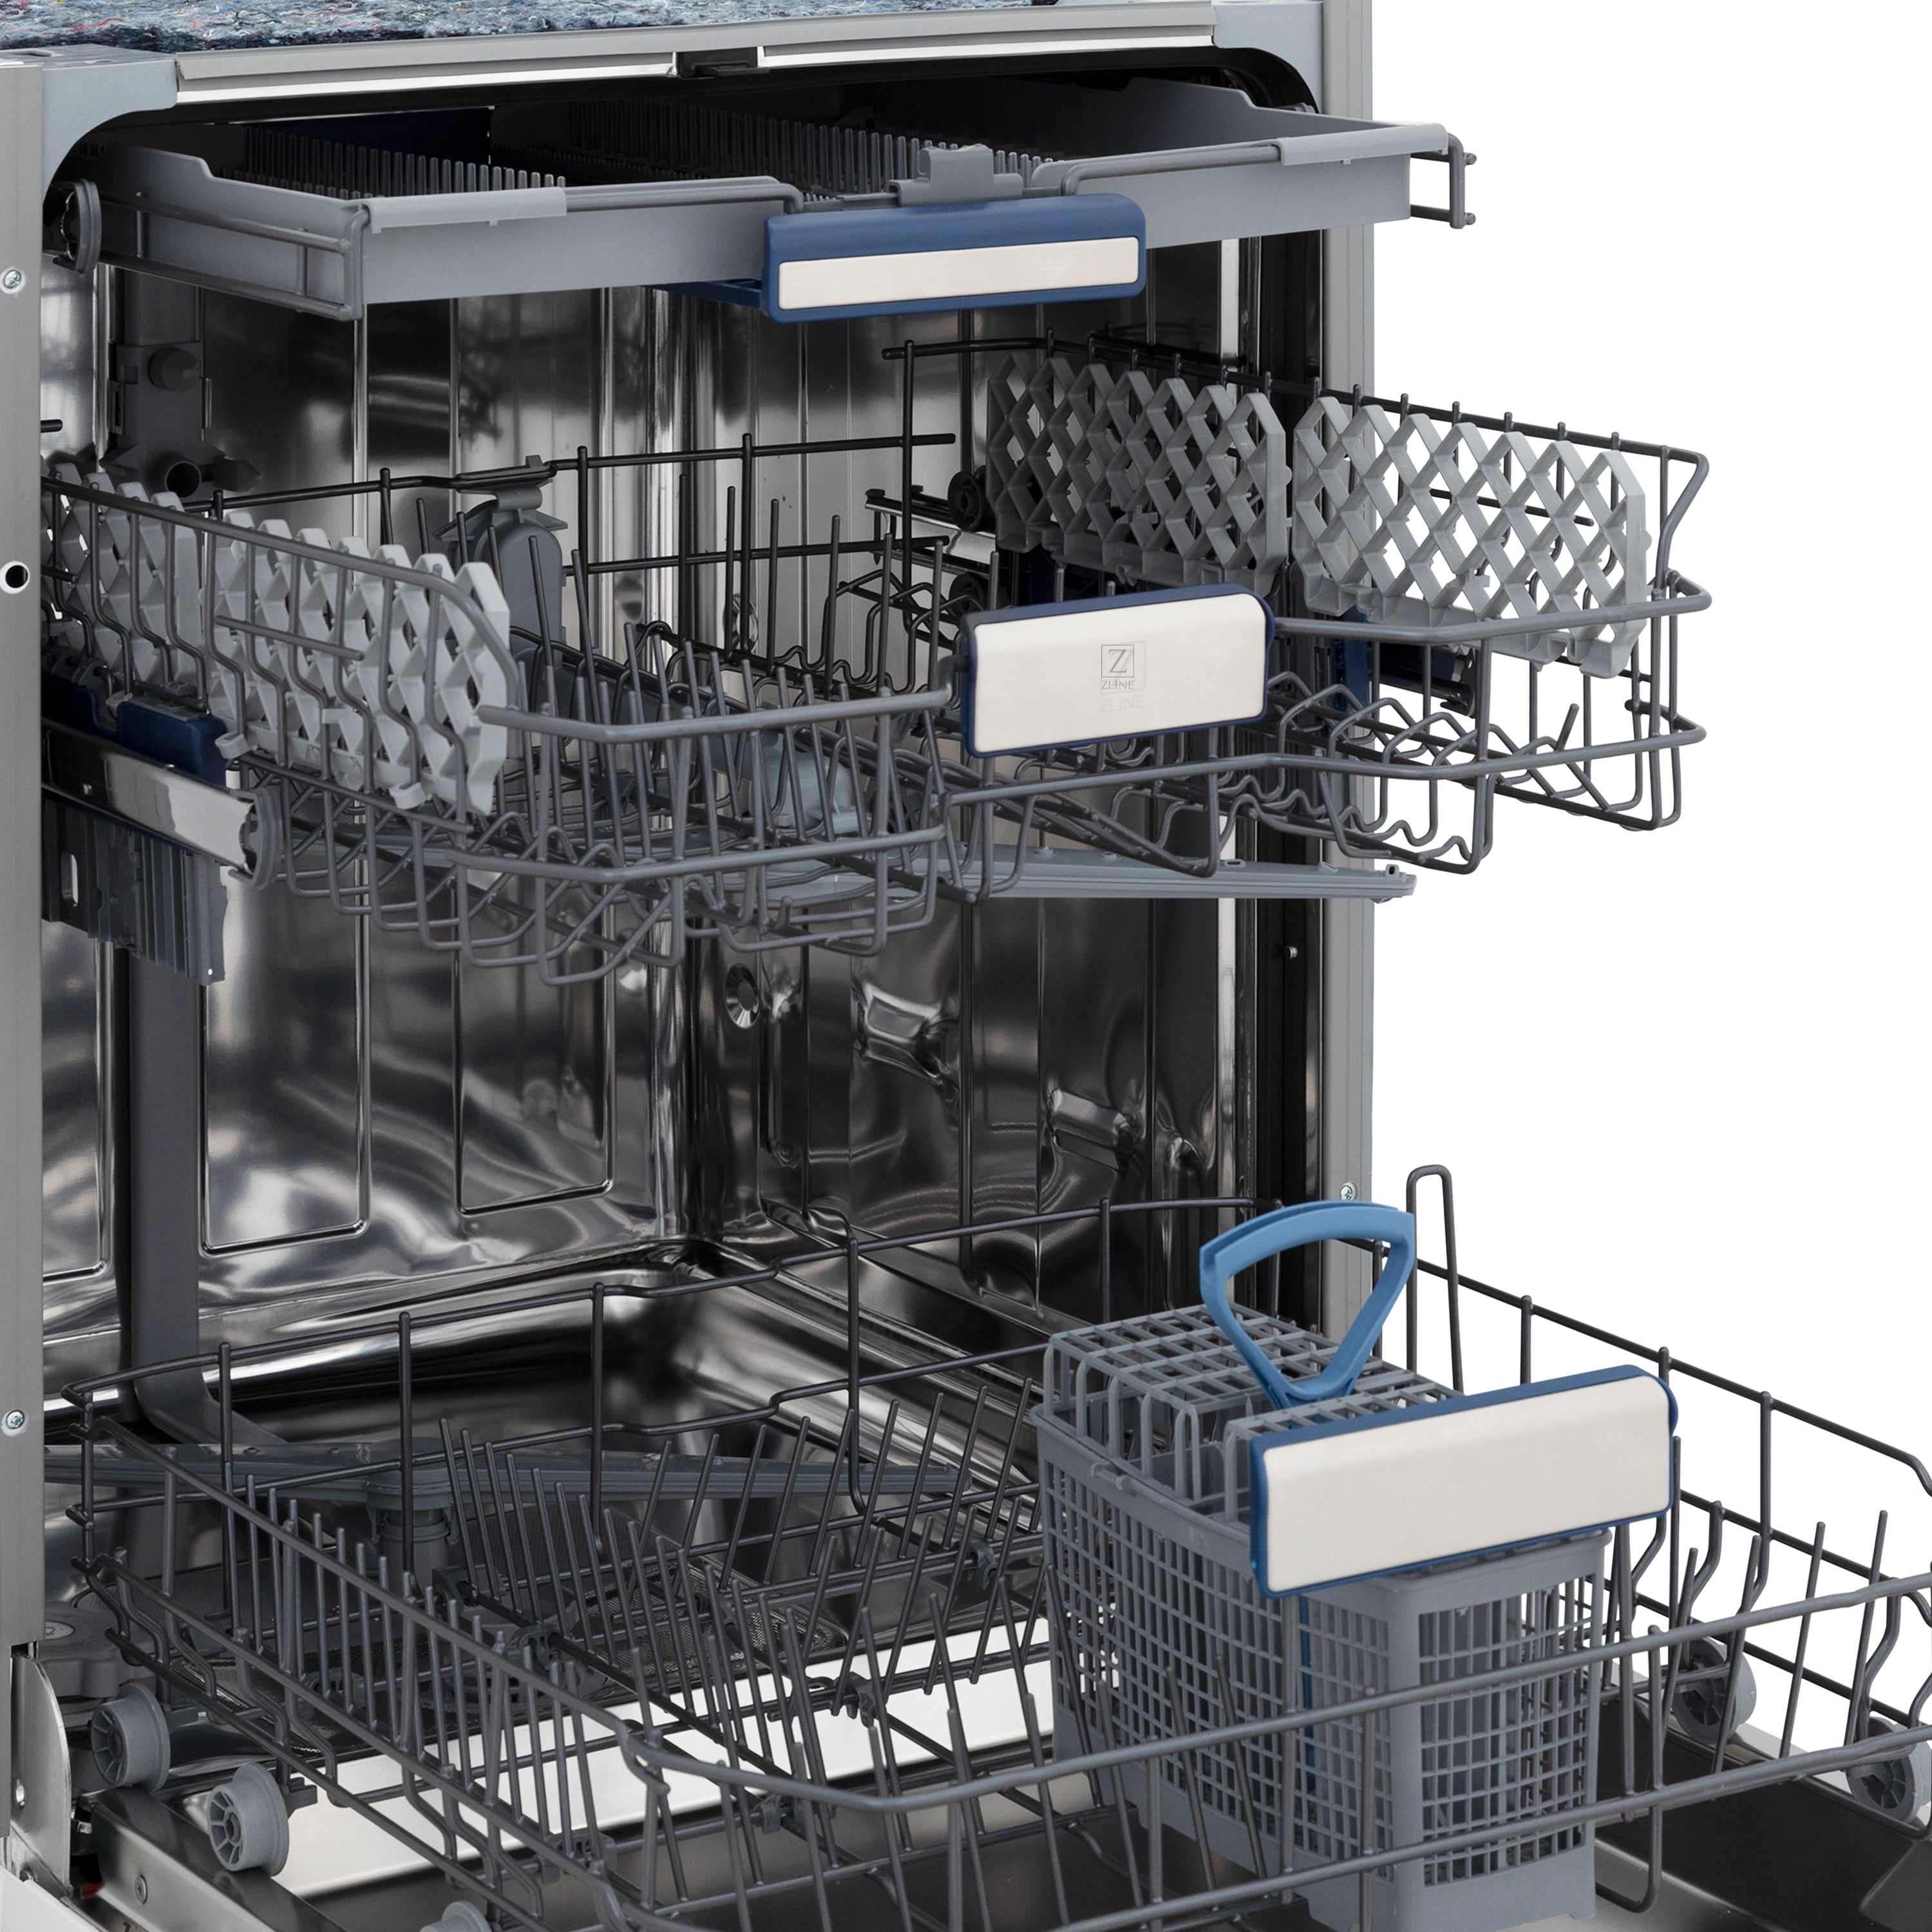 ZLINE 24" Tallac Series 3rd Rack Dishwasher in Custom Panel Ready with Stainless Steel Tub and Traditional Handle, 51dBa (DWV-24)